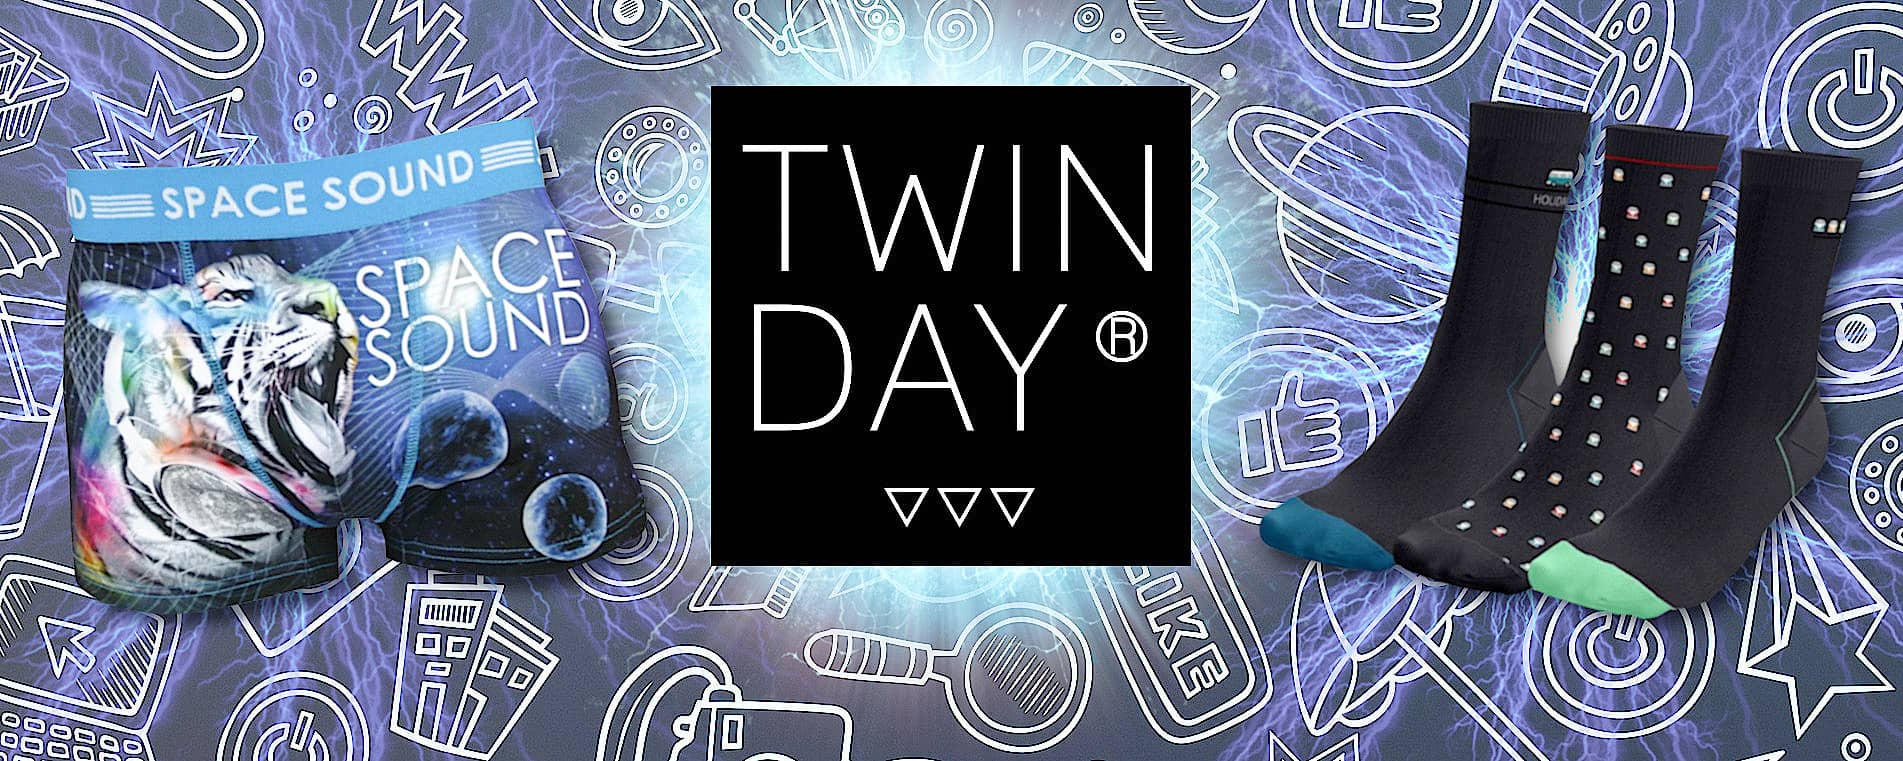 marque twinday